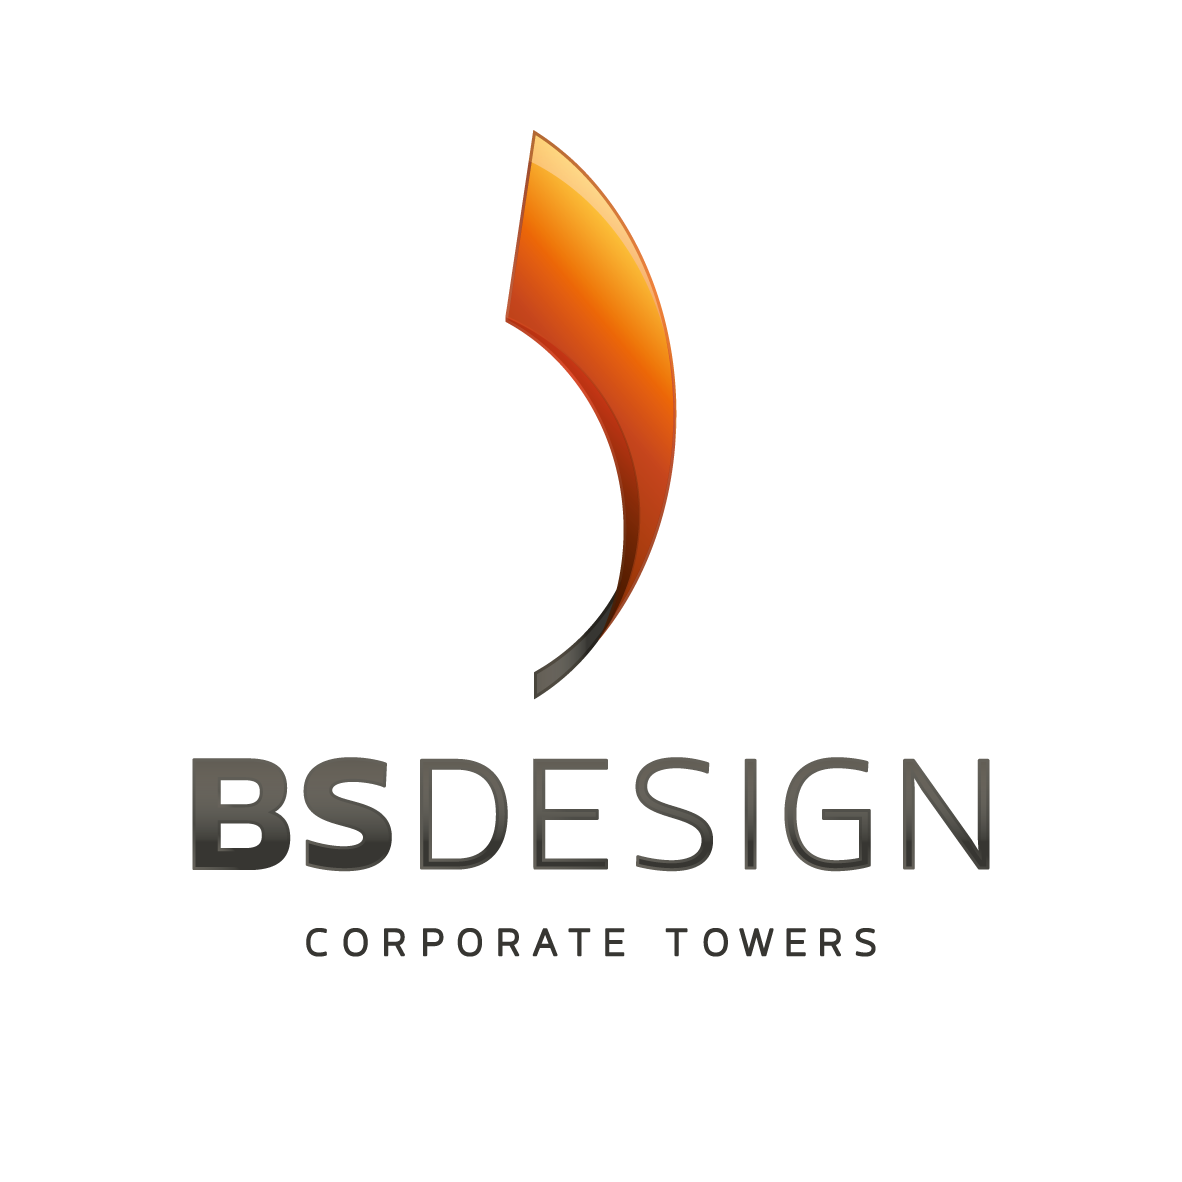 BS Design Corporate Towers